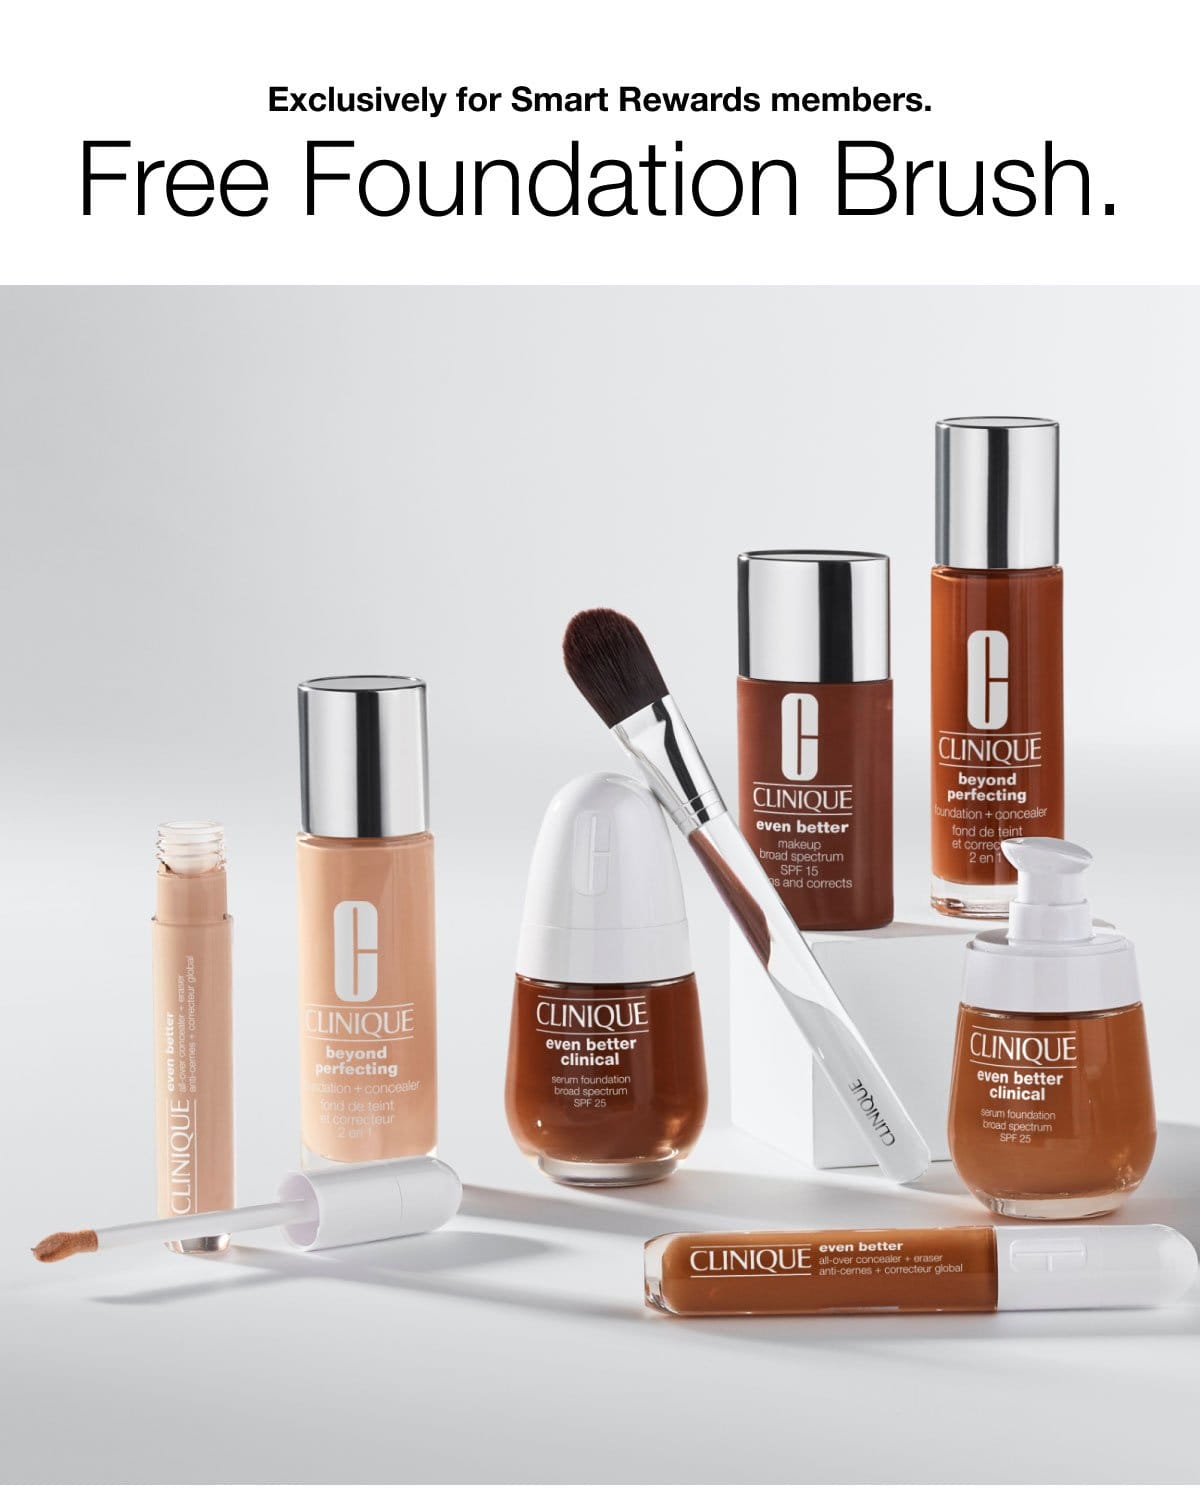 Exclusively for Smart Rewards members. | Free Foundation Brush.